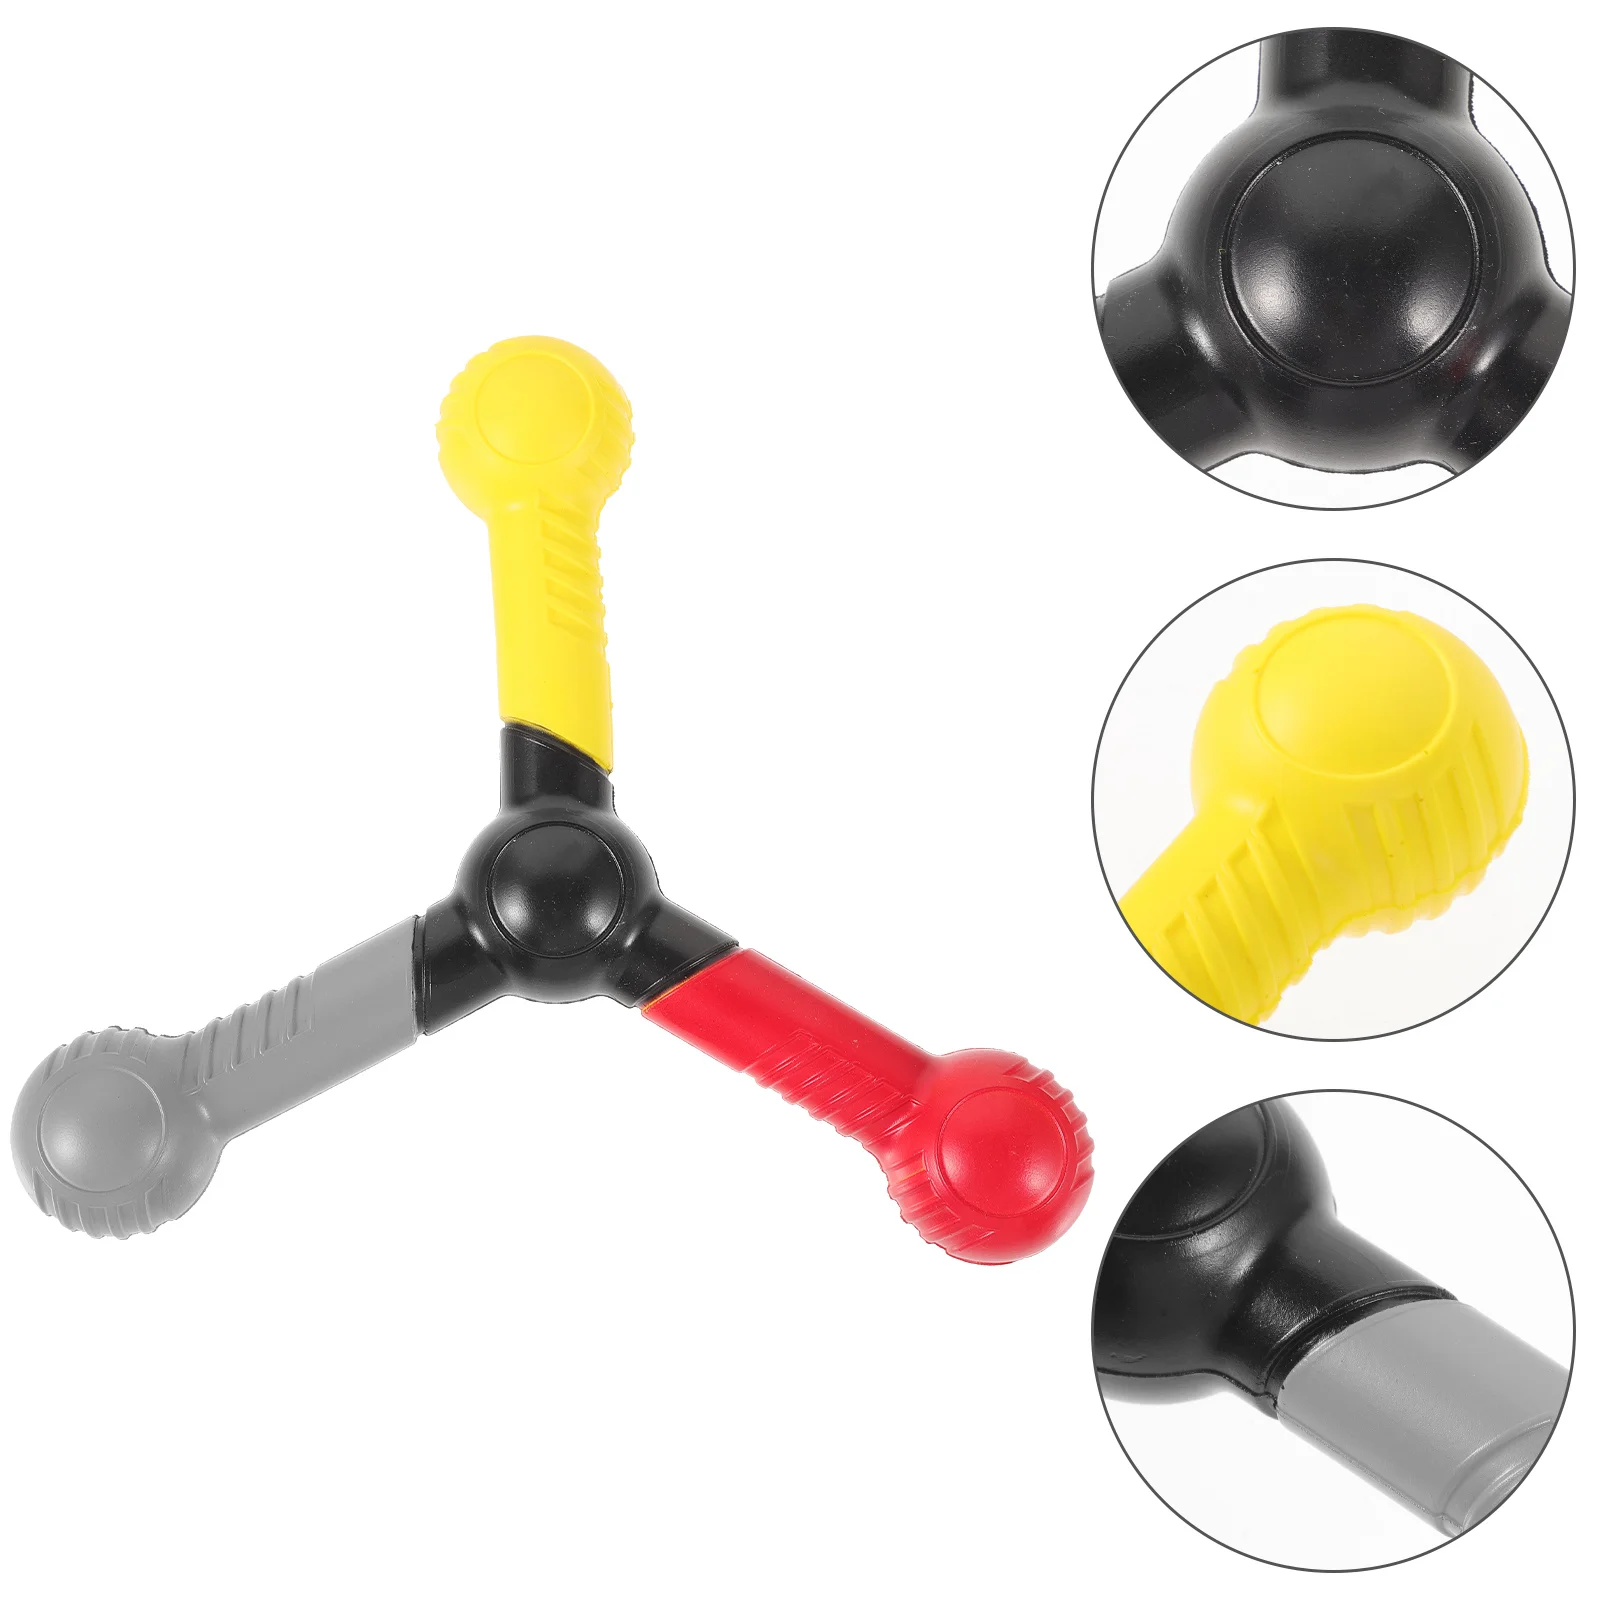 

Training Stick Hand Trainer Tool Reaction Eye Coordination Catching Toy Improving Agility Reflex Interesting Colored Focus Catch